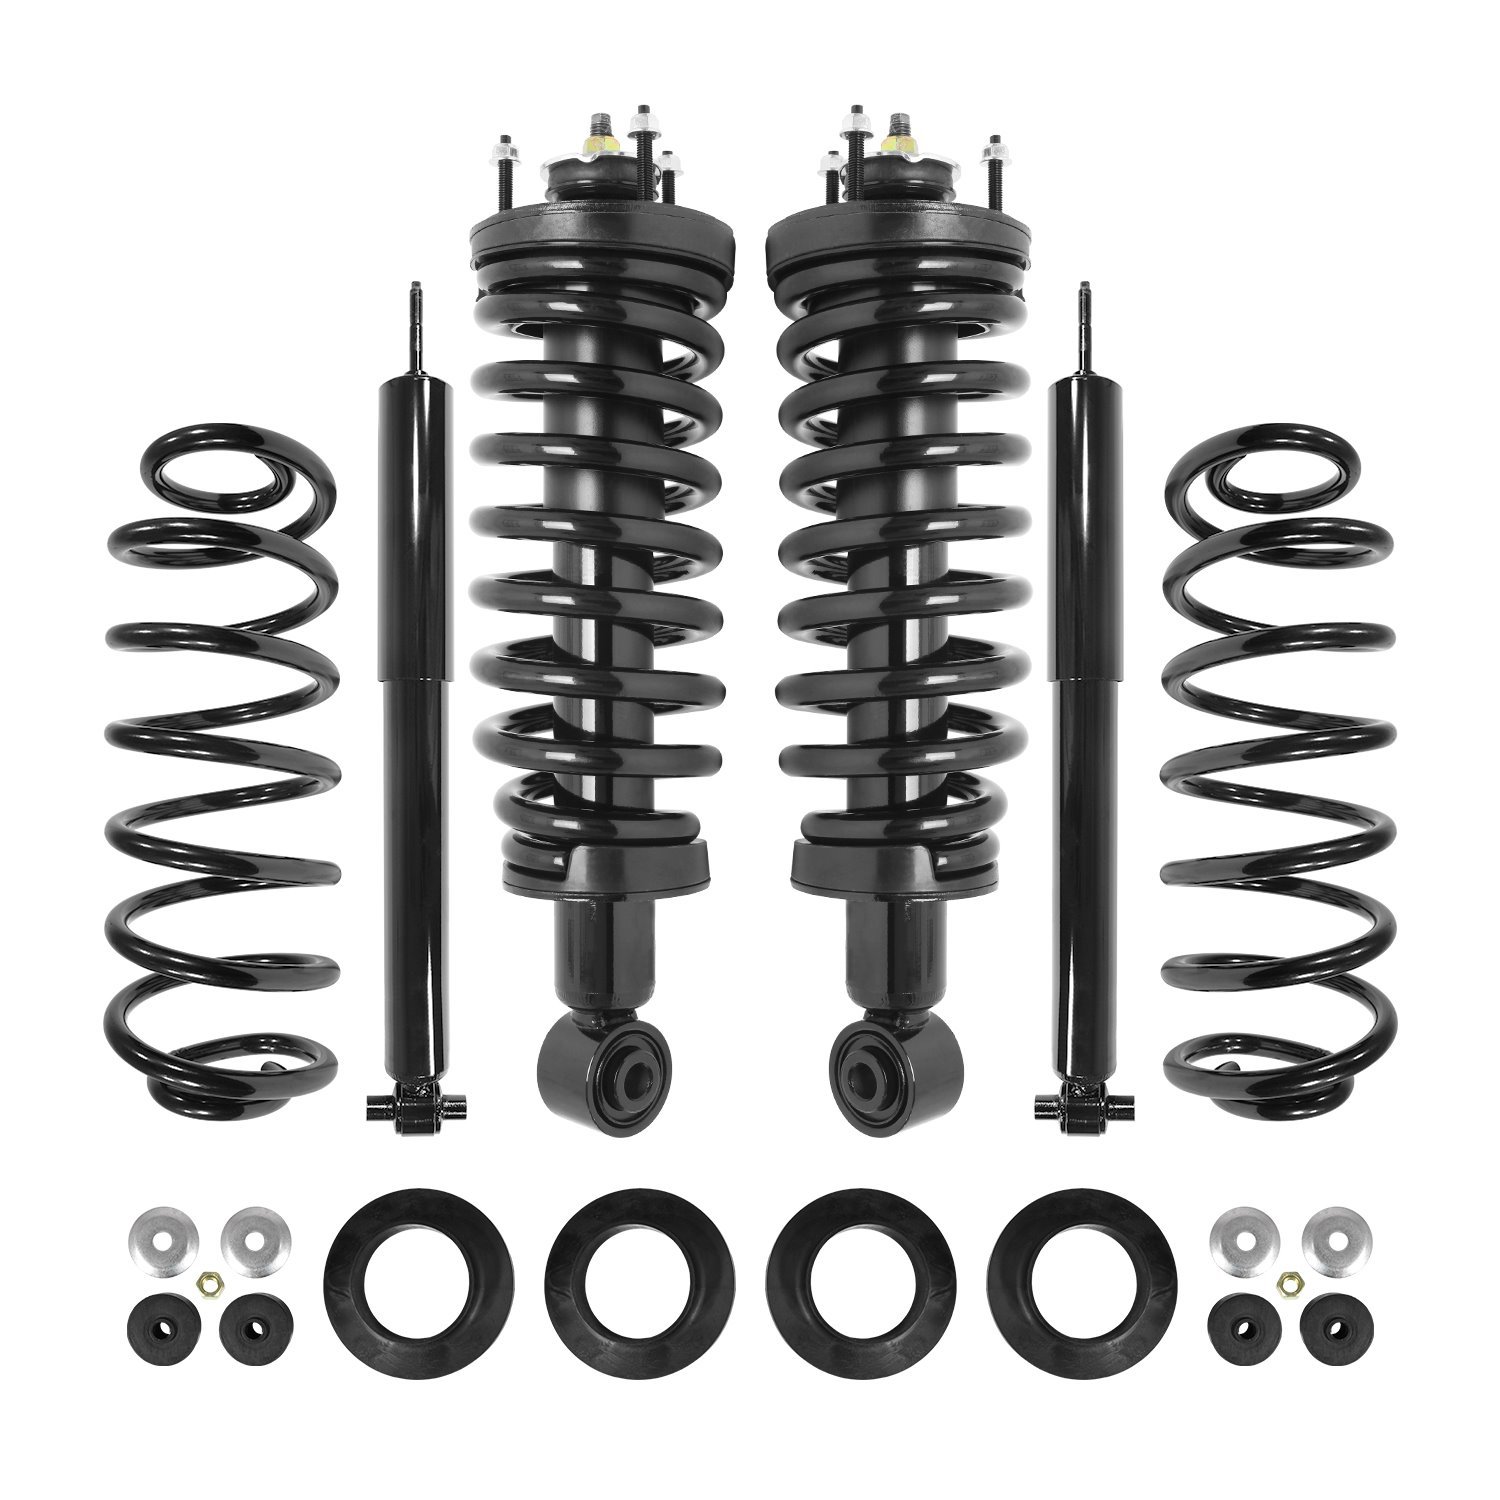 4-61800C-65993c-001 Air Spring To Coil Spring Conversion Kit Fits Select Ford/Lincoln/Mercury